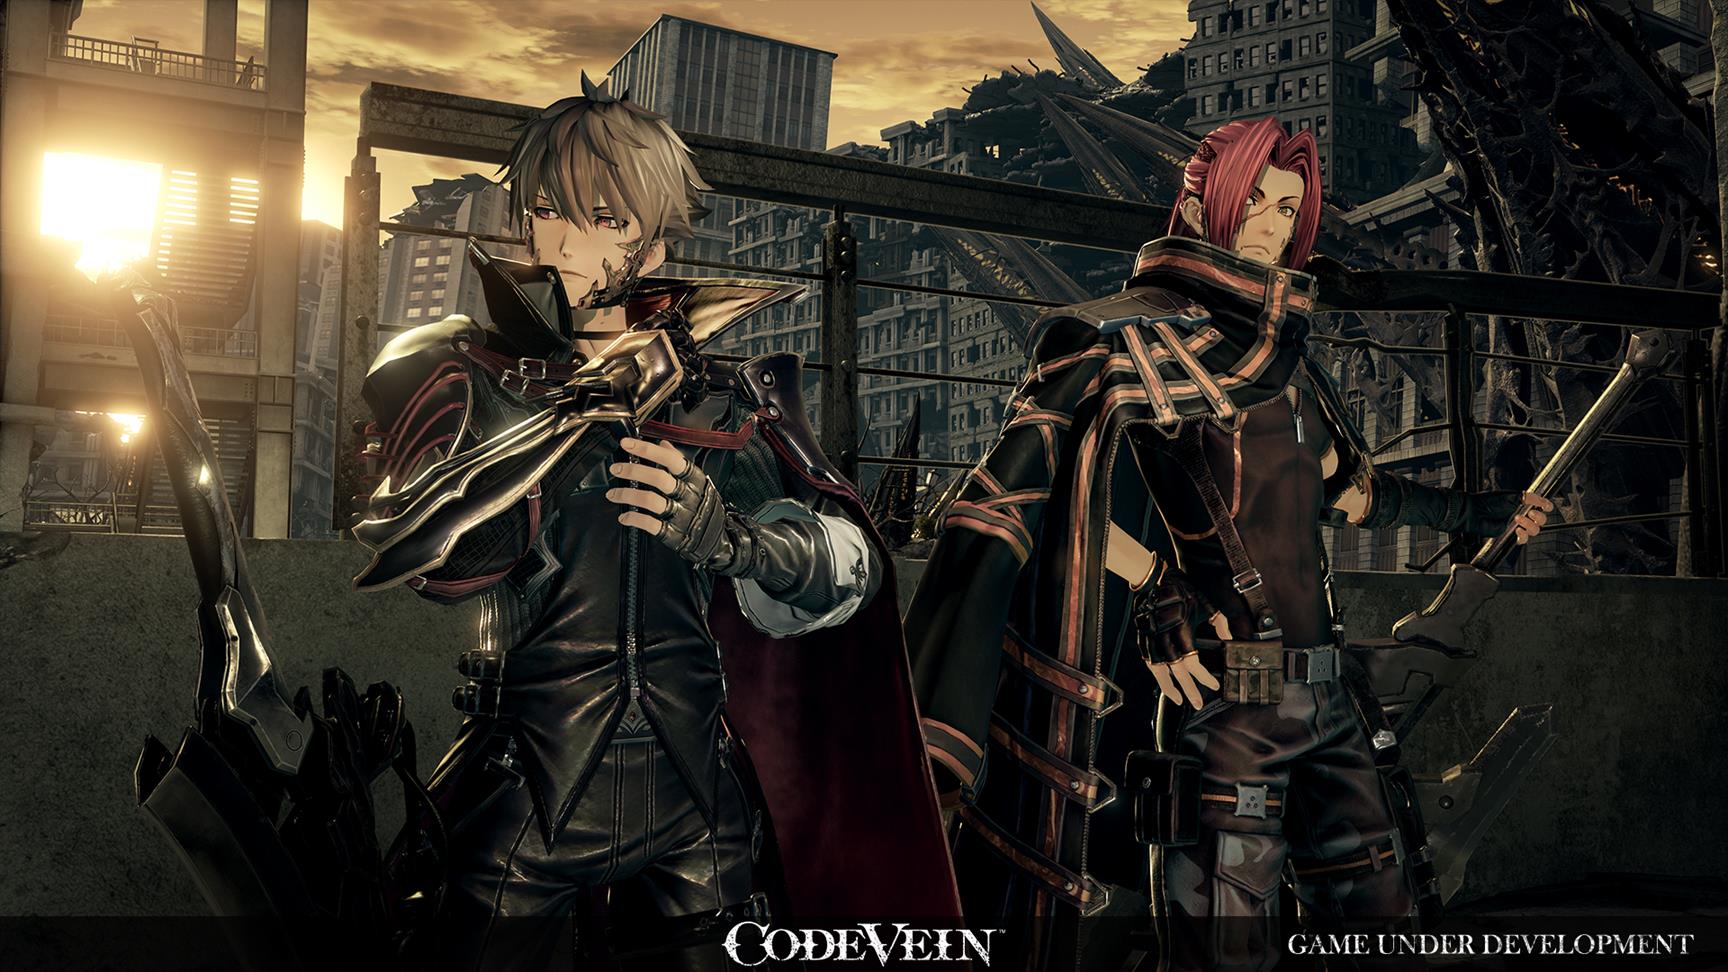 Image for The first unedited gameplay footage from Code Vein focuses on one-on-one combat